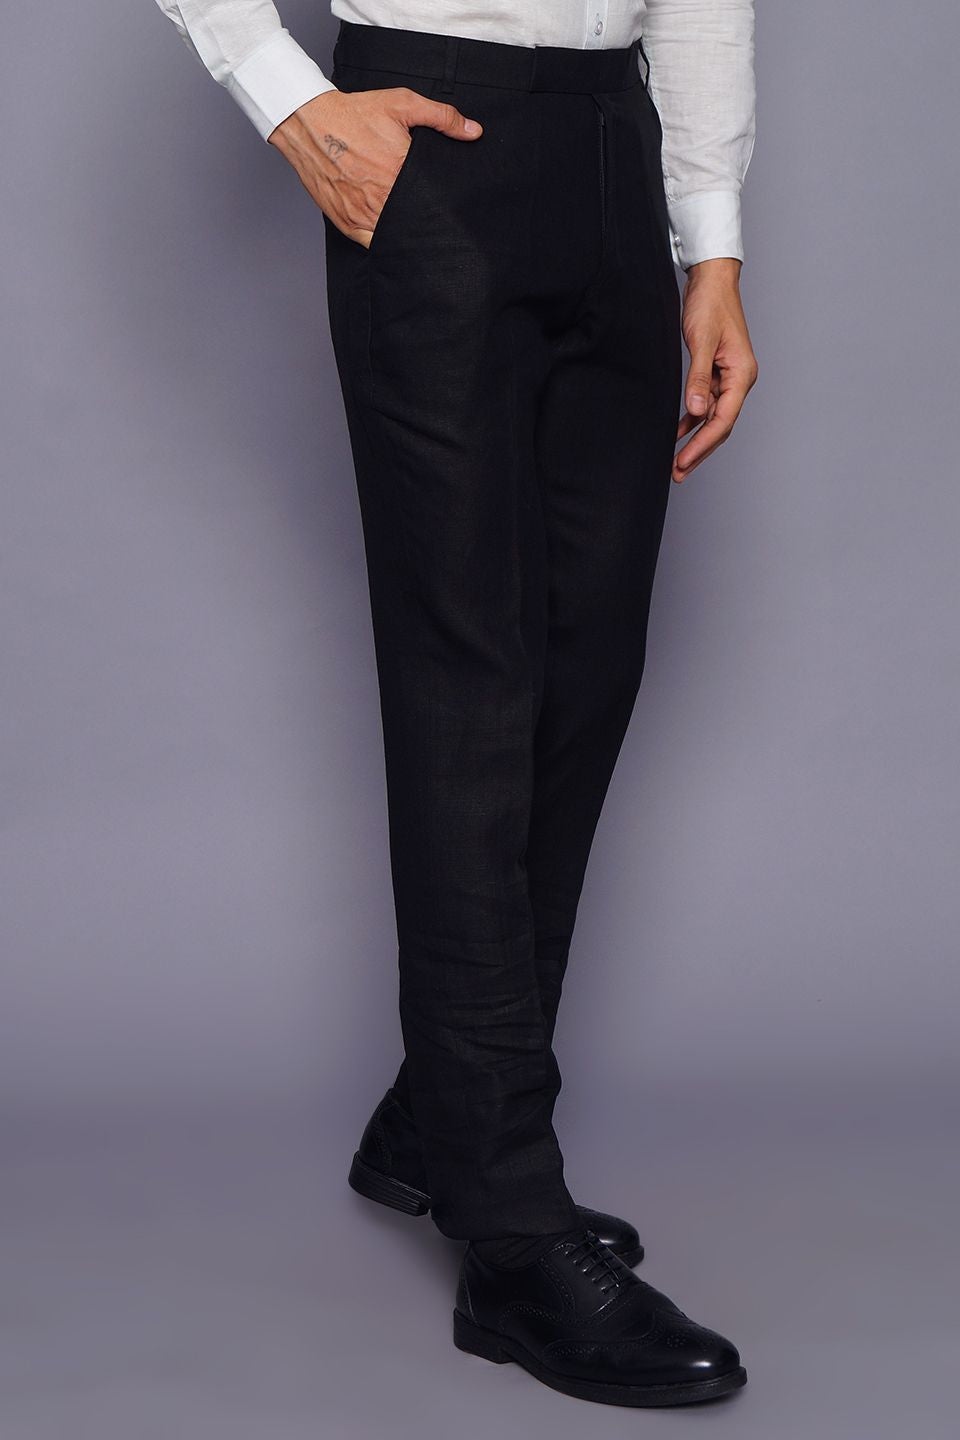 Amazon.in: Pencil Fit Pants For Men